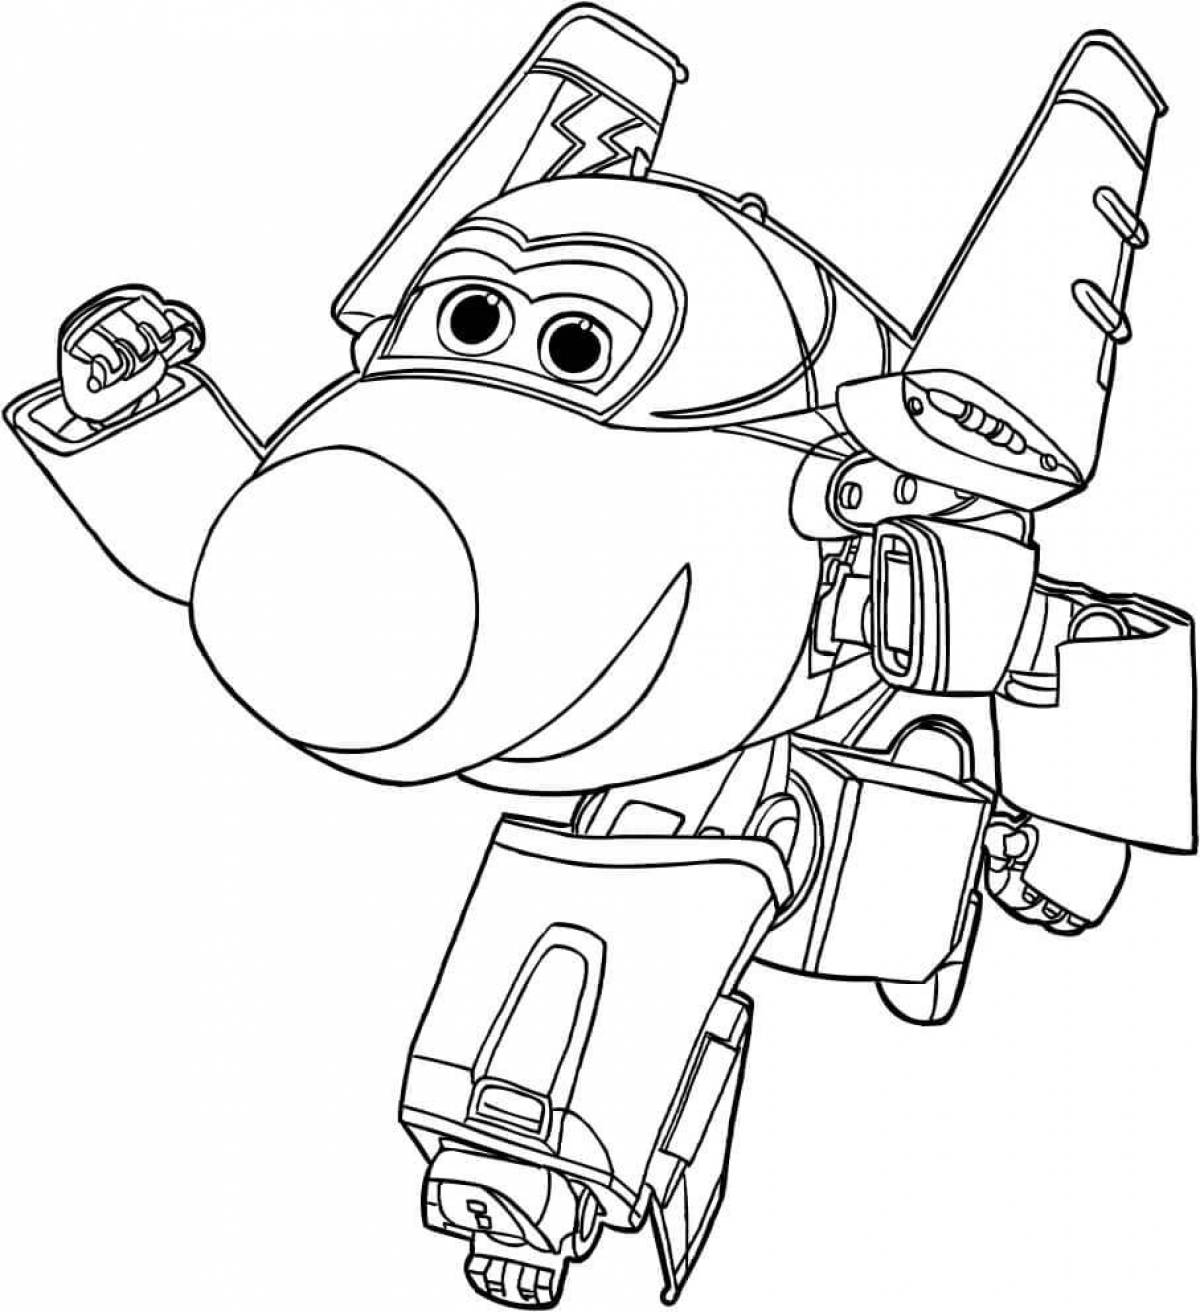 Amazing super wings coloring pages for kids